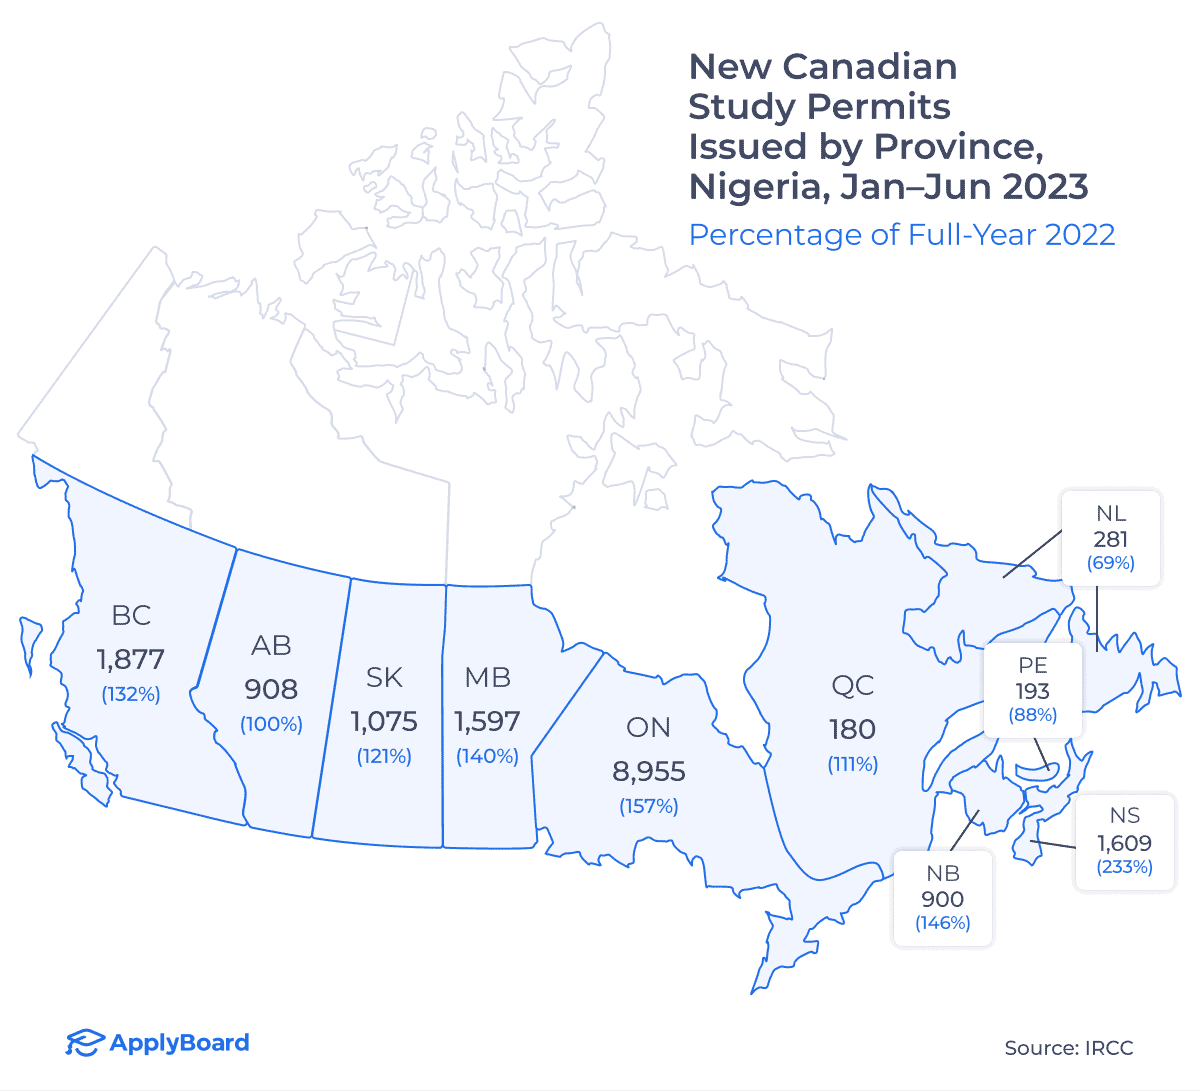 A map showing the provinces of Canada and the distribution of new study permits issued to Nigerian students across them from January to June 2023. 